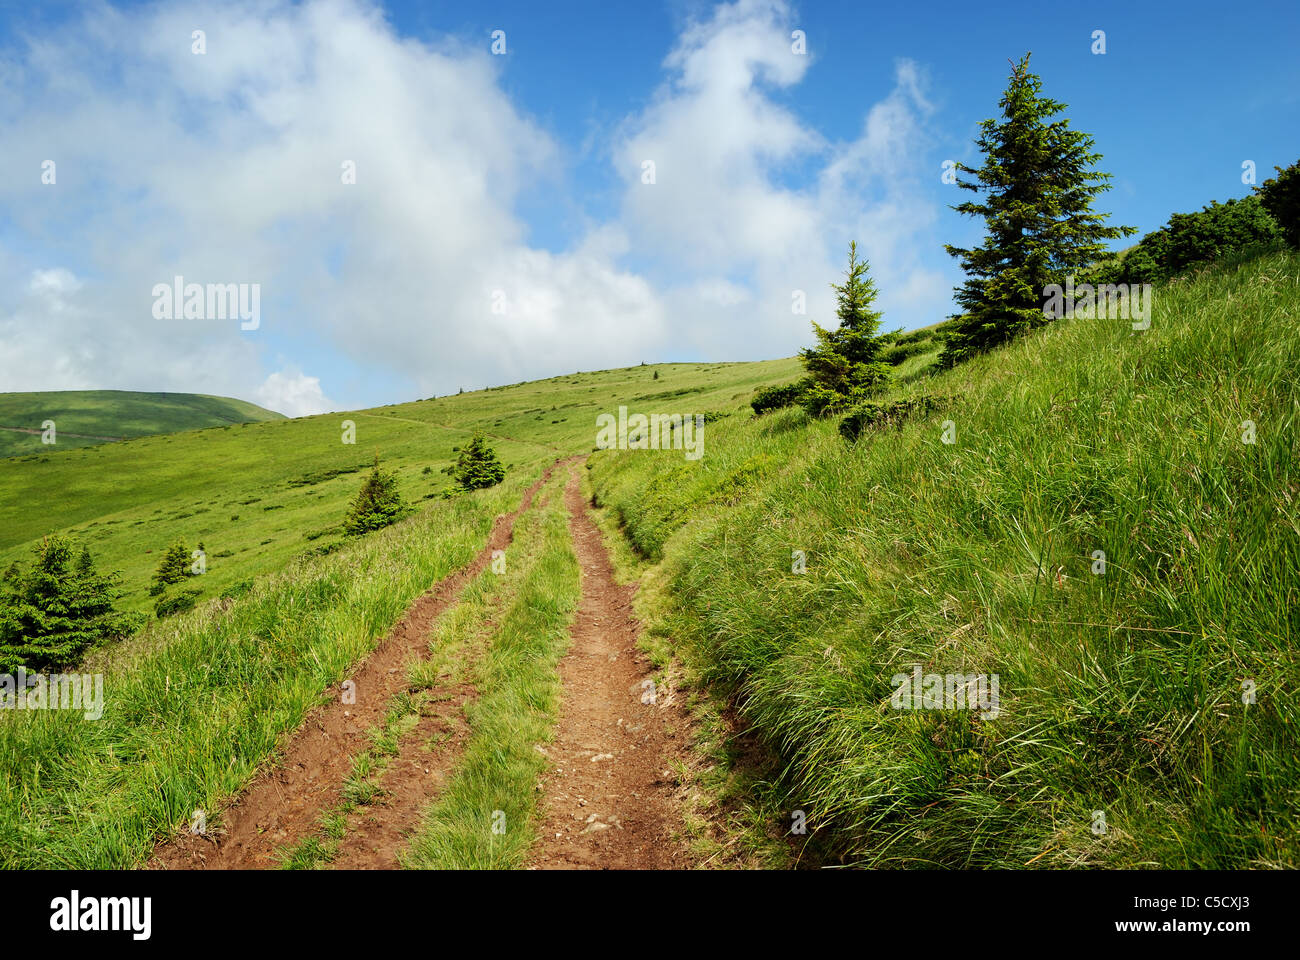 mountain dirt road and fir trees on the hill Stock Photo